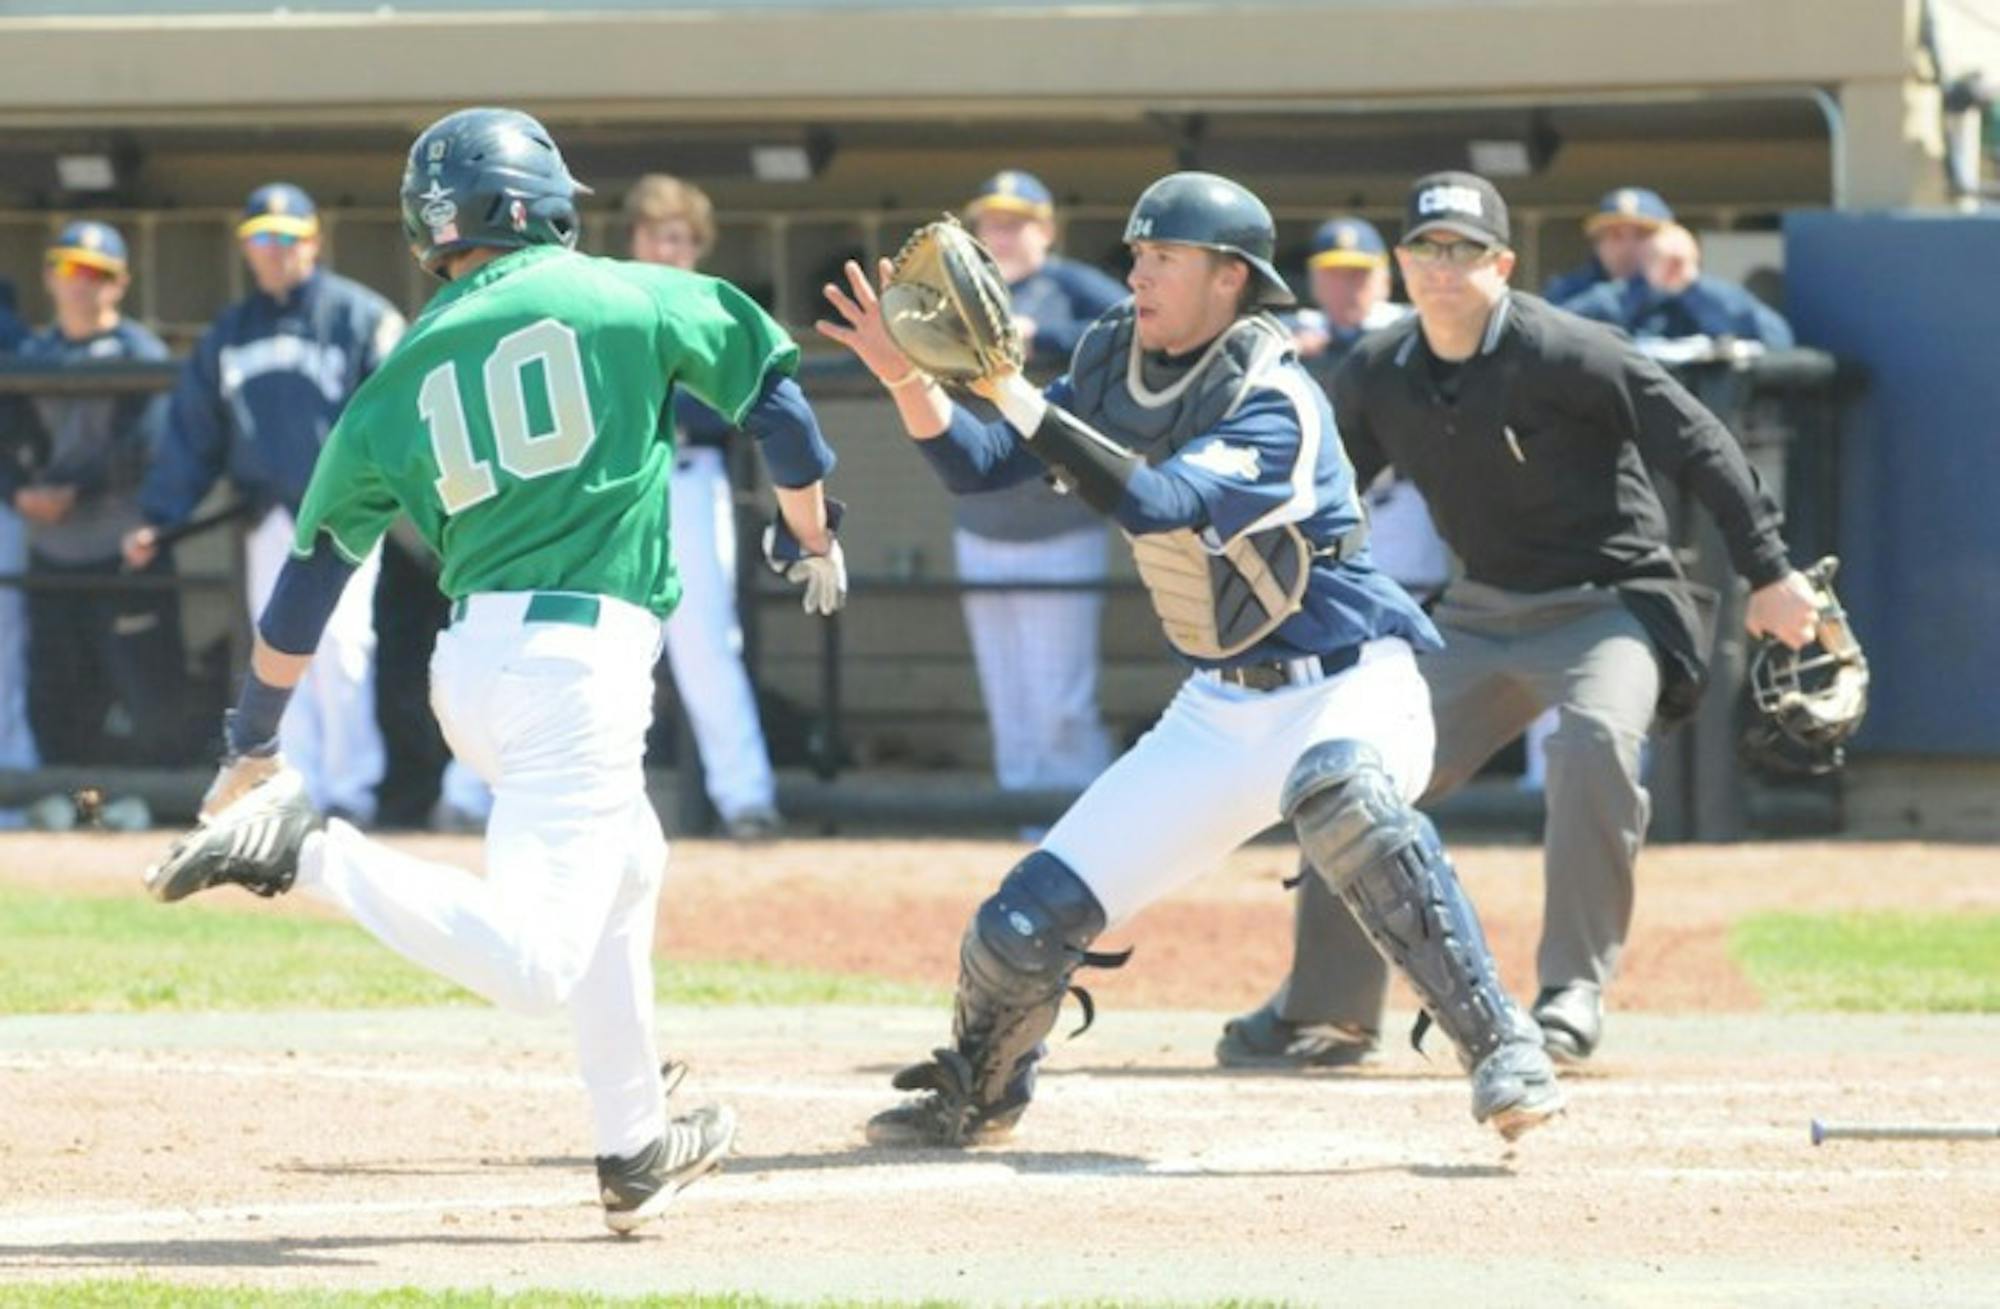 Irish junior outfielder Conor Biggio attempts a hook slide around Quinnipiac junior catcher Steffen Herter during Notre Dame's 5-1 win on April 21. Last season, Biggio hit .263 for the Irish. Though playing primarily as a bench player, Biggio also finished fourth on the team in stolen bases, finishing with four in 2013.